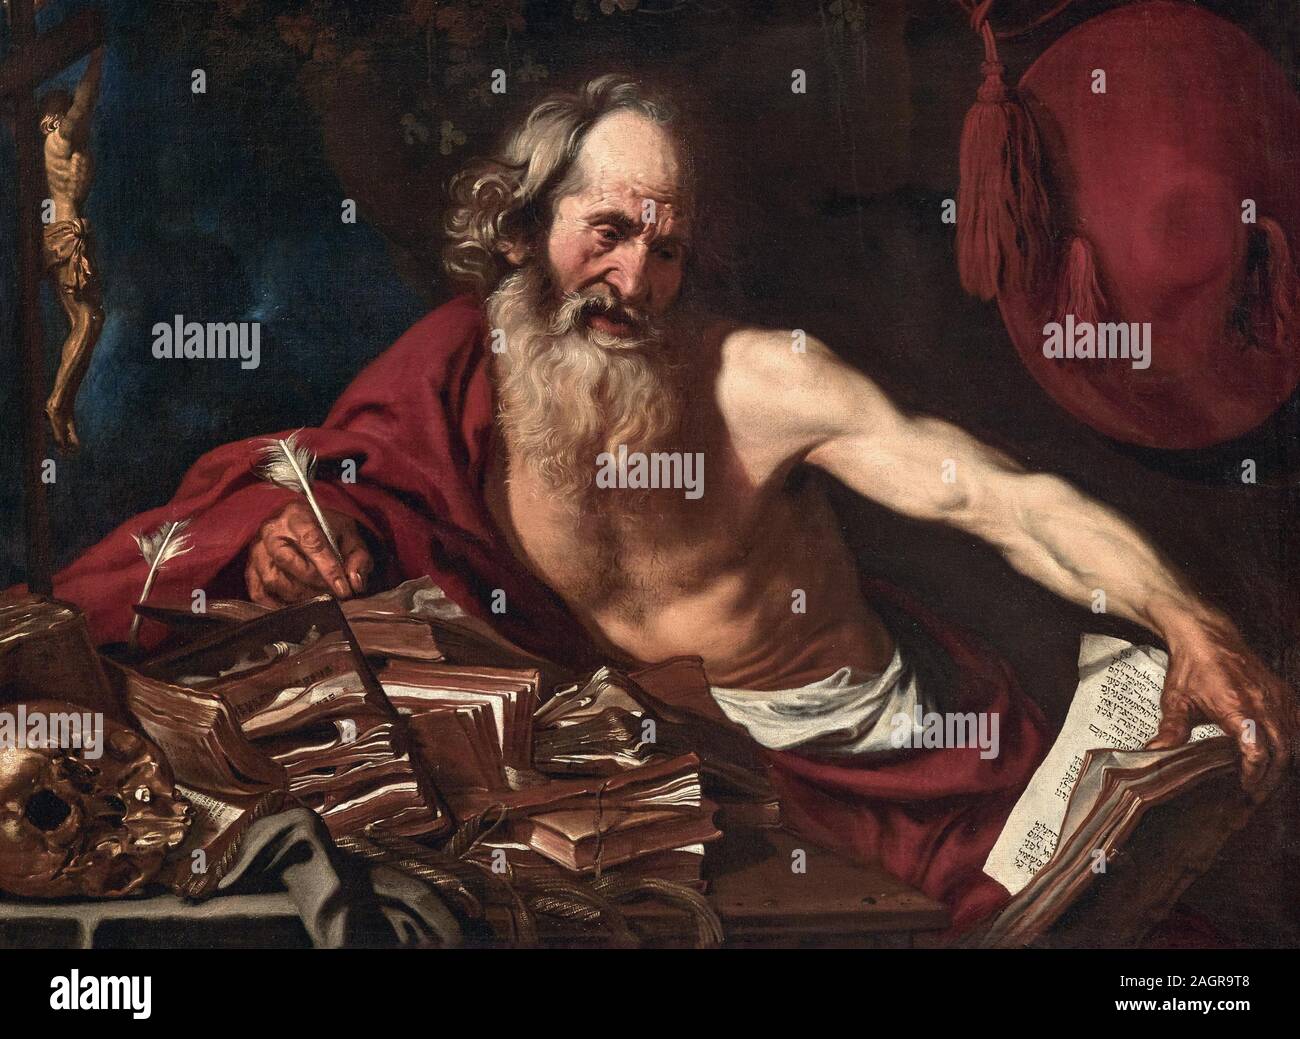 Saint Jerome in his Cell. Museum: PRIVATE COLLECTION. Author: Joost Van de Hamme. Stock Photo